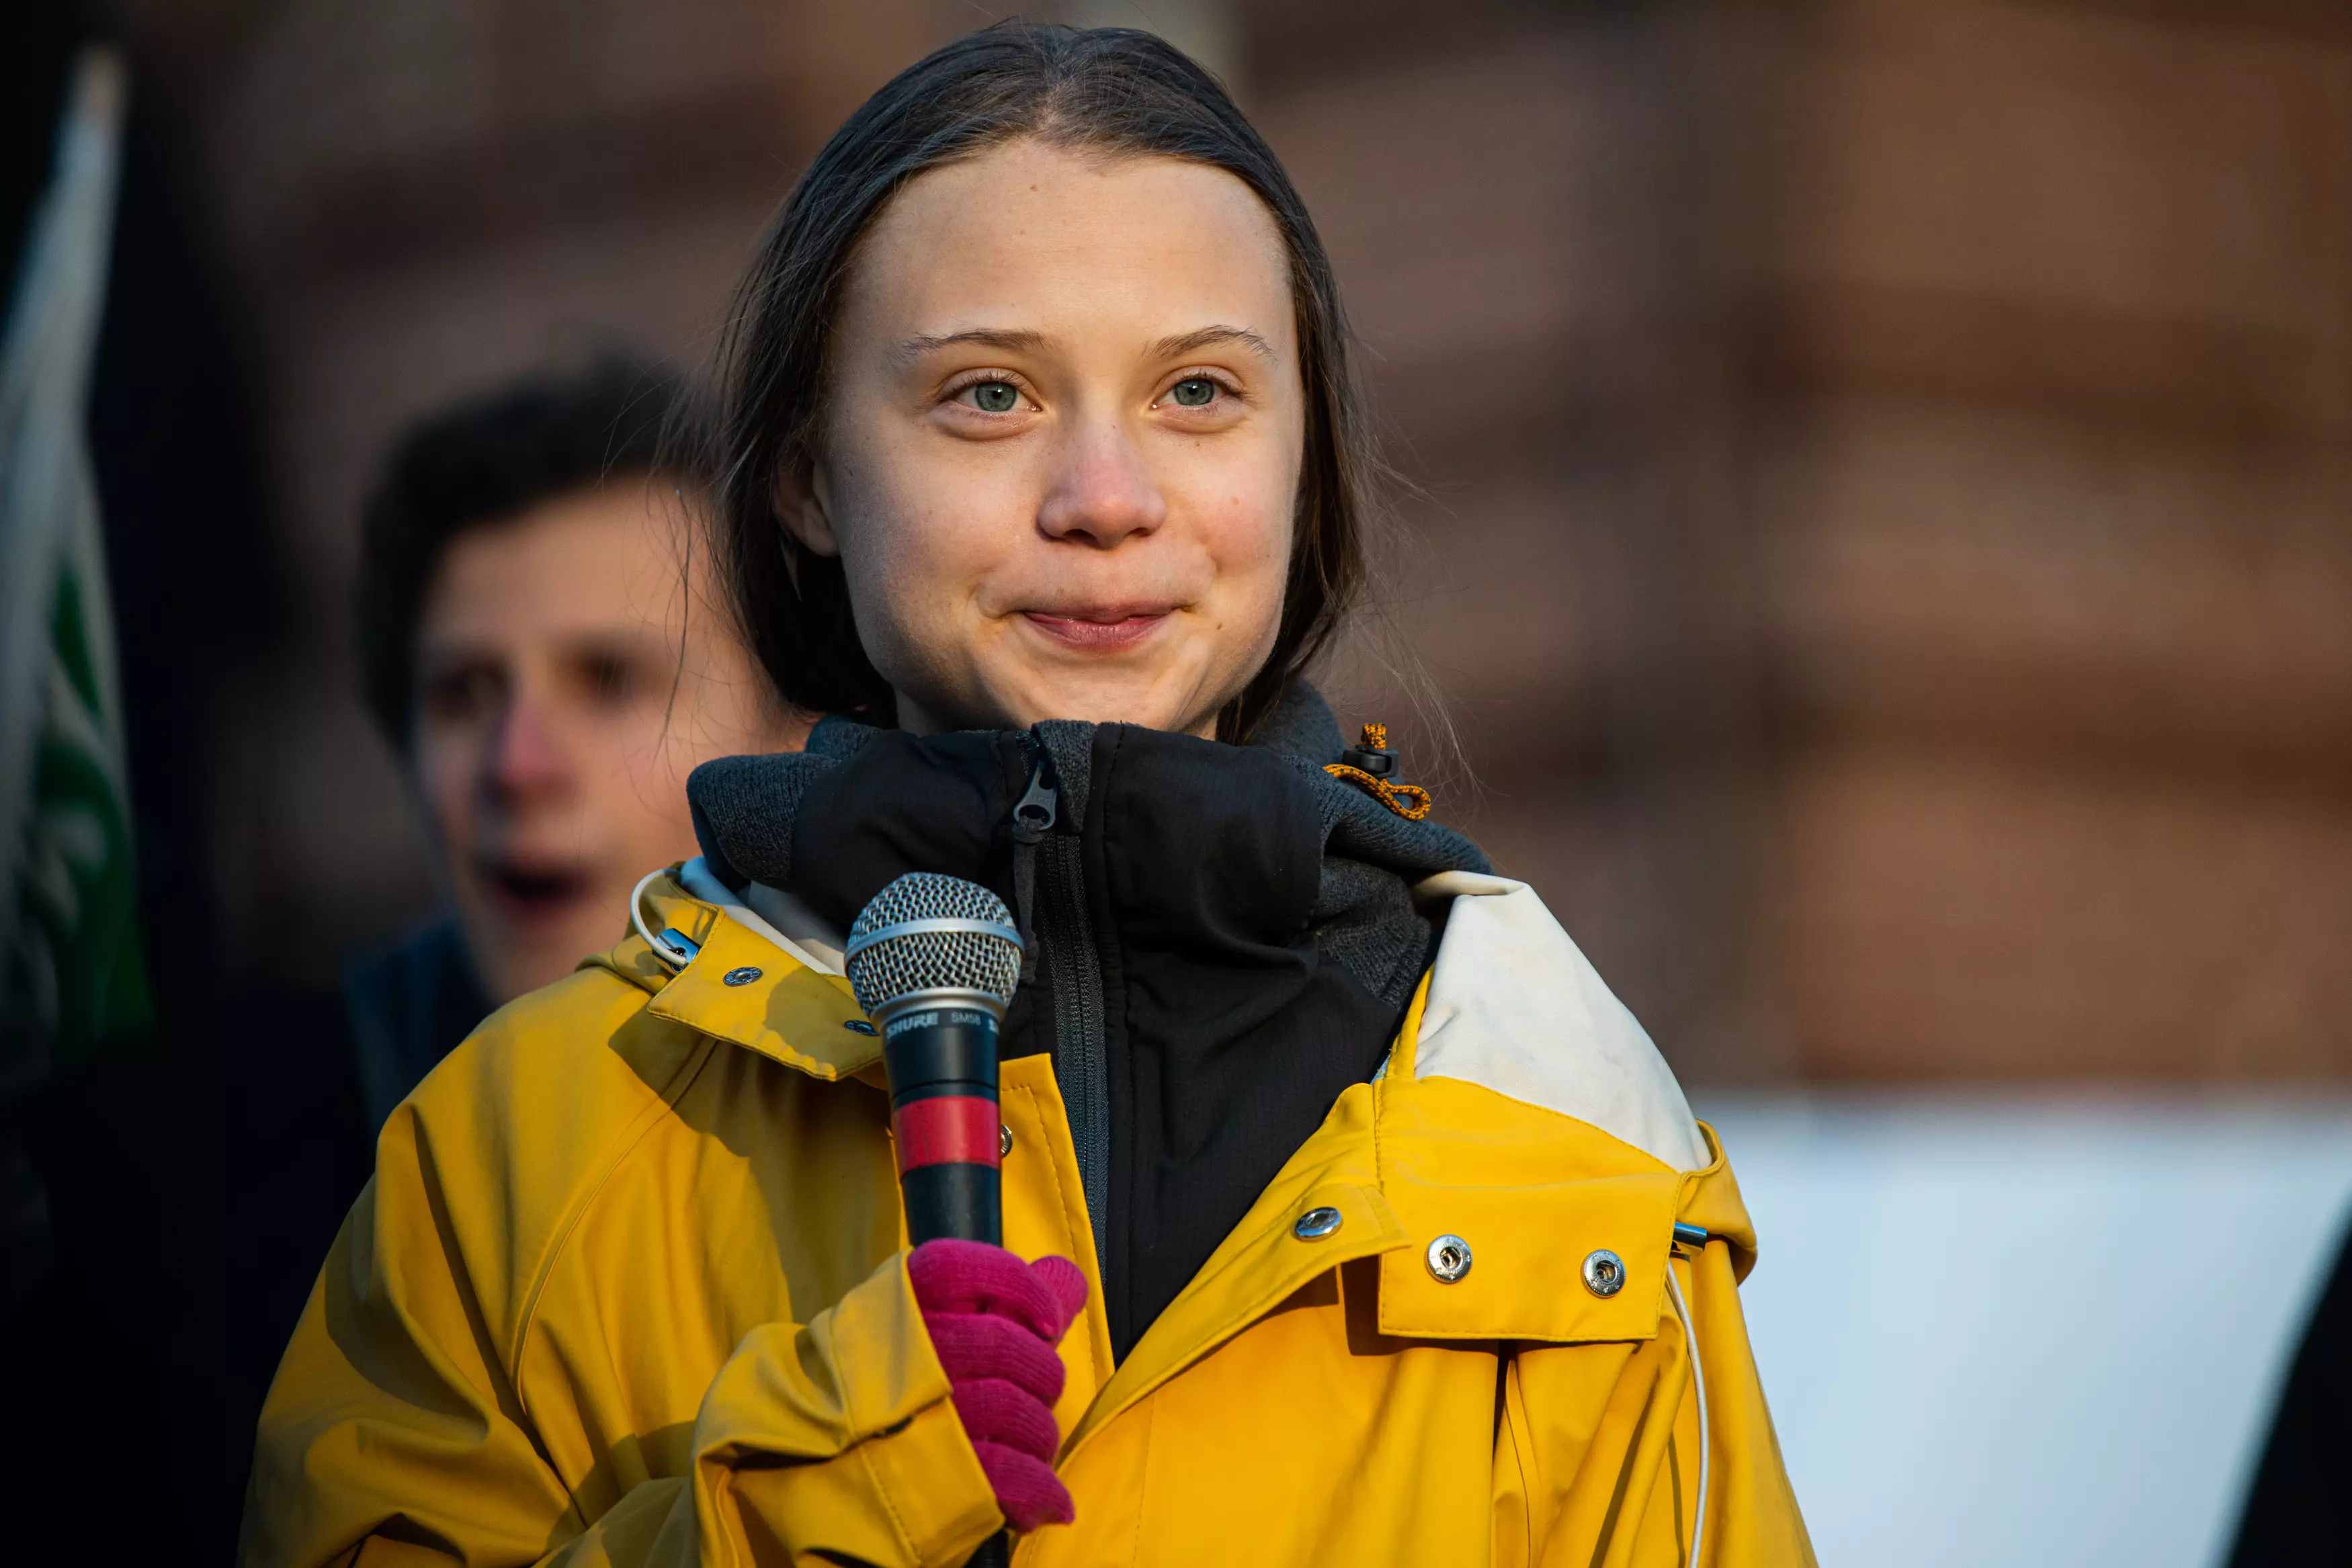 Greta Thunberg was nominated for this year's Nobel Peace Prize.